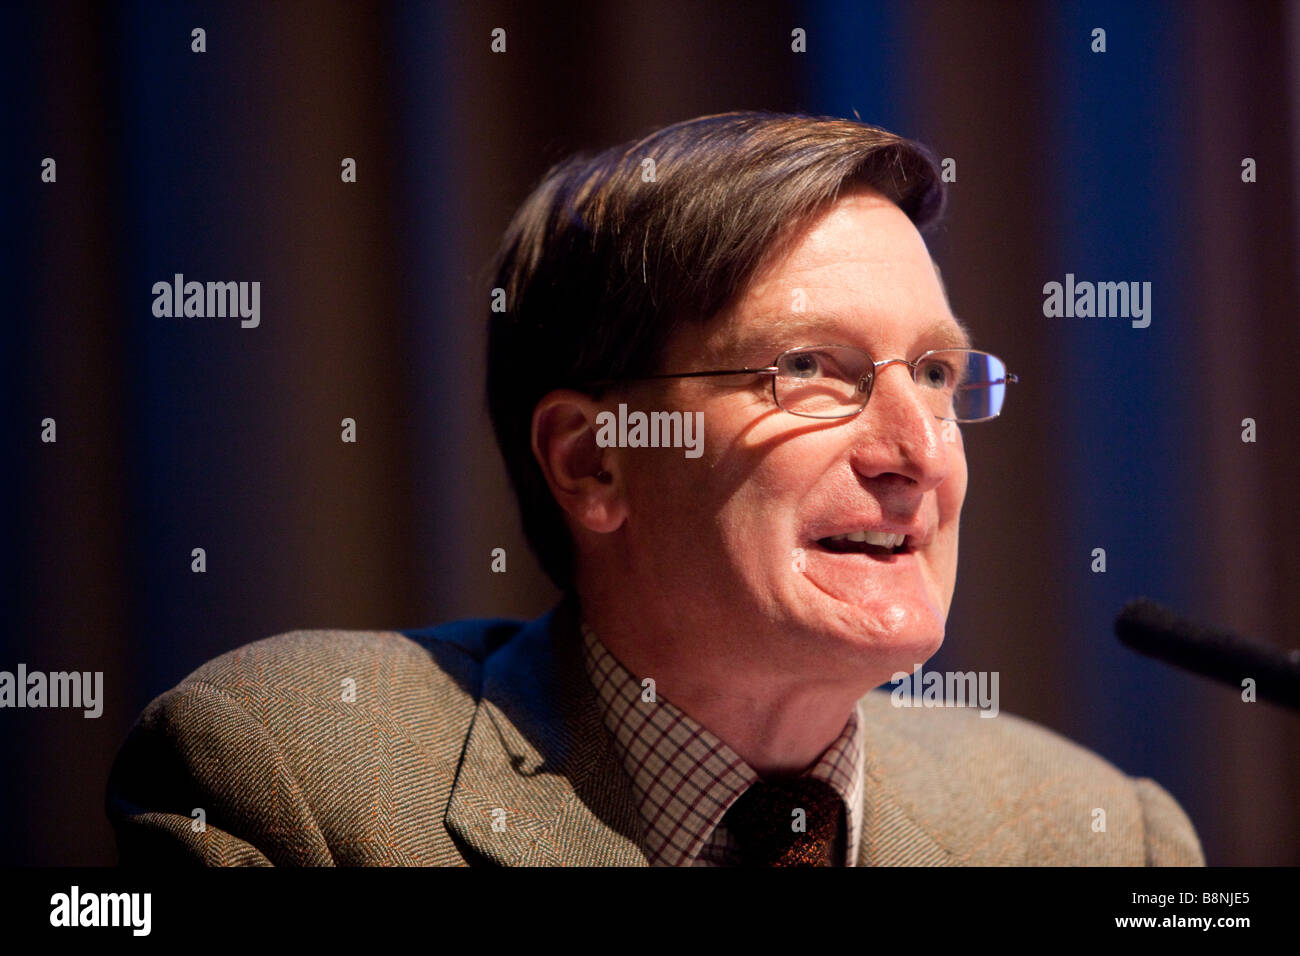 The Convention on Modern Liberty London England 28th February 2009 Dominic Grieve QC MP Shadow Attorney General speaking Stock Photo